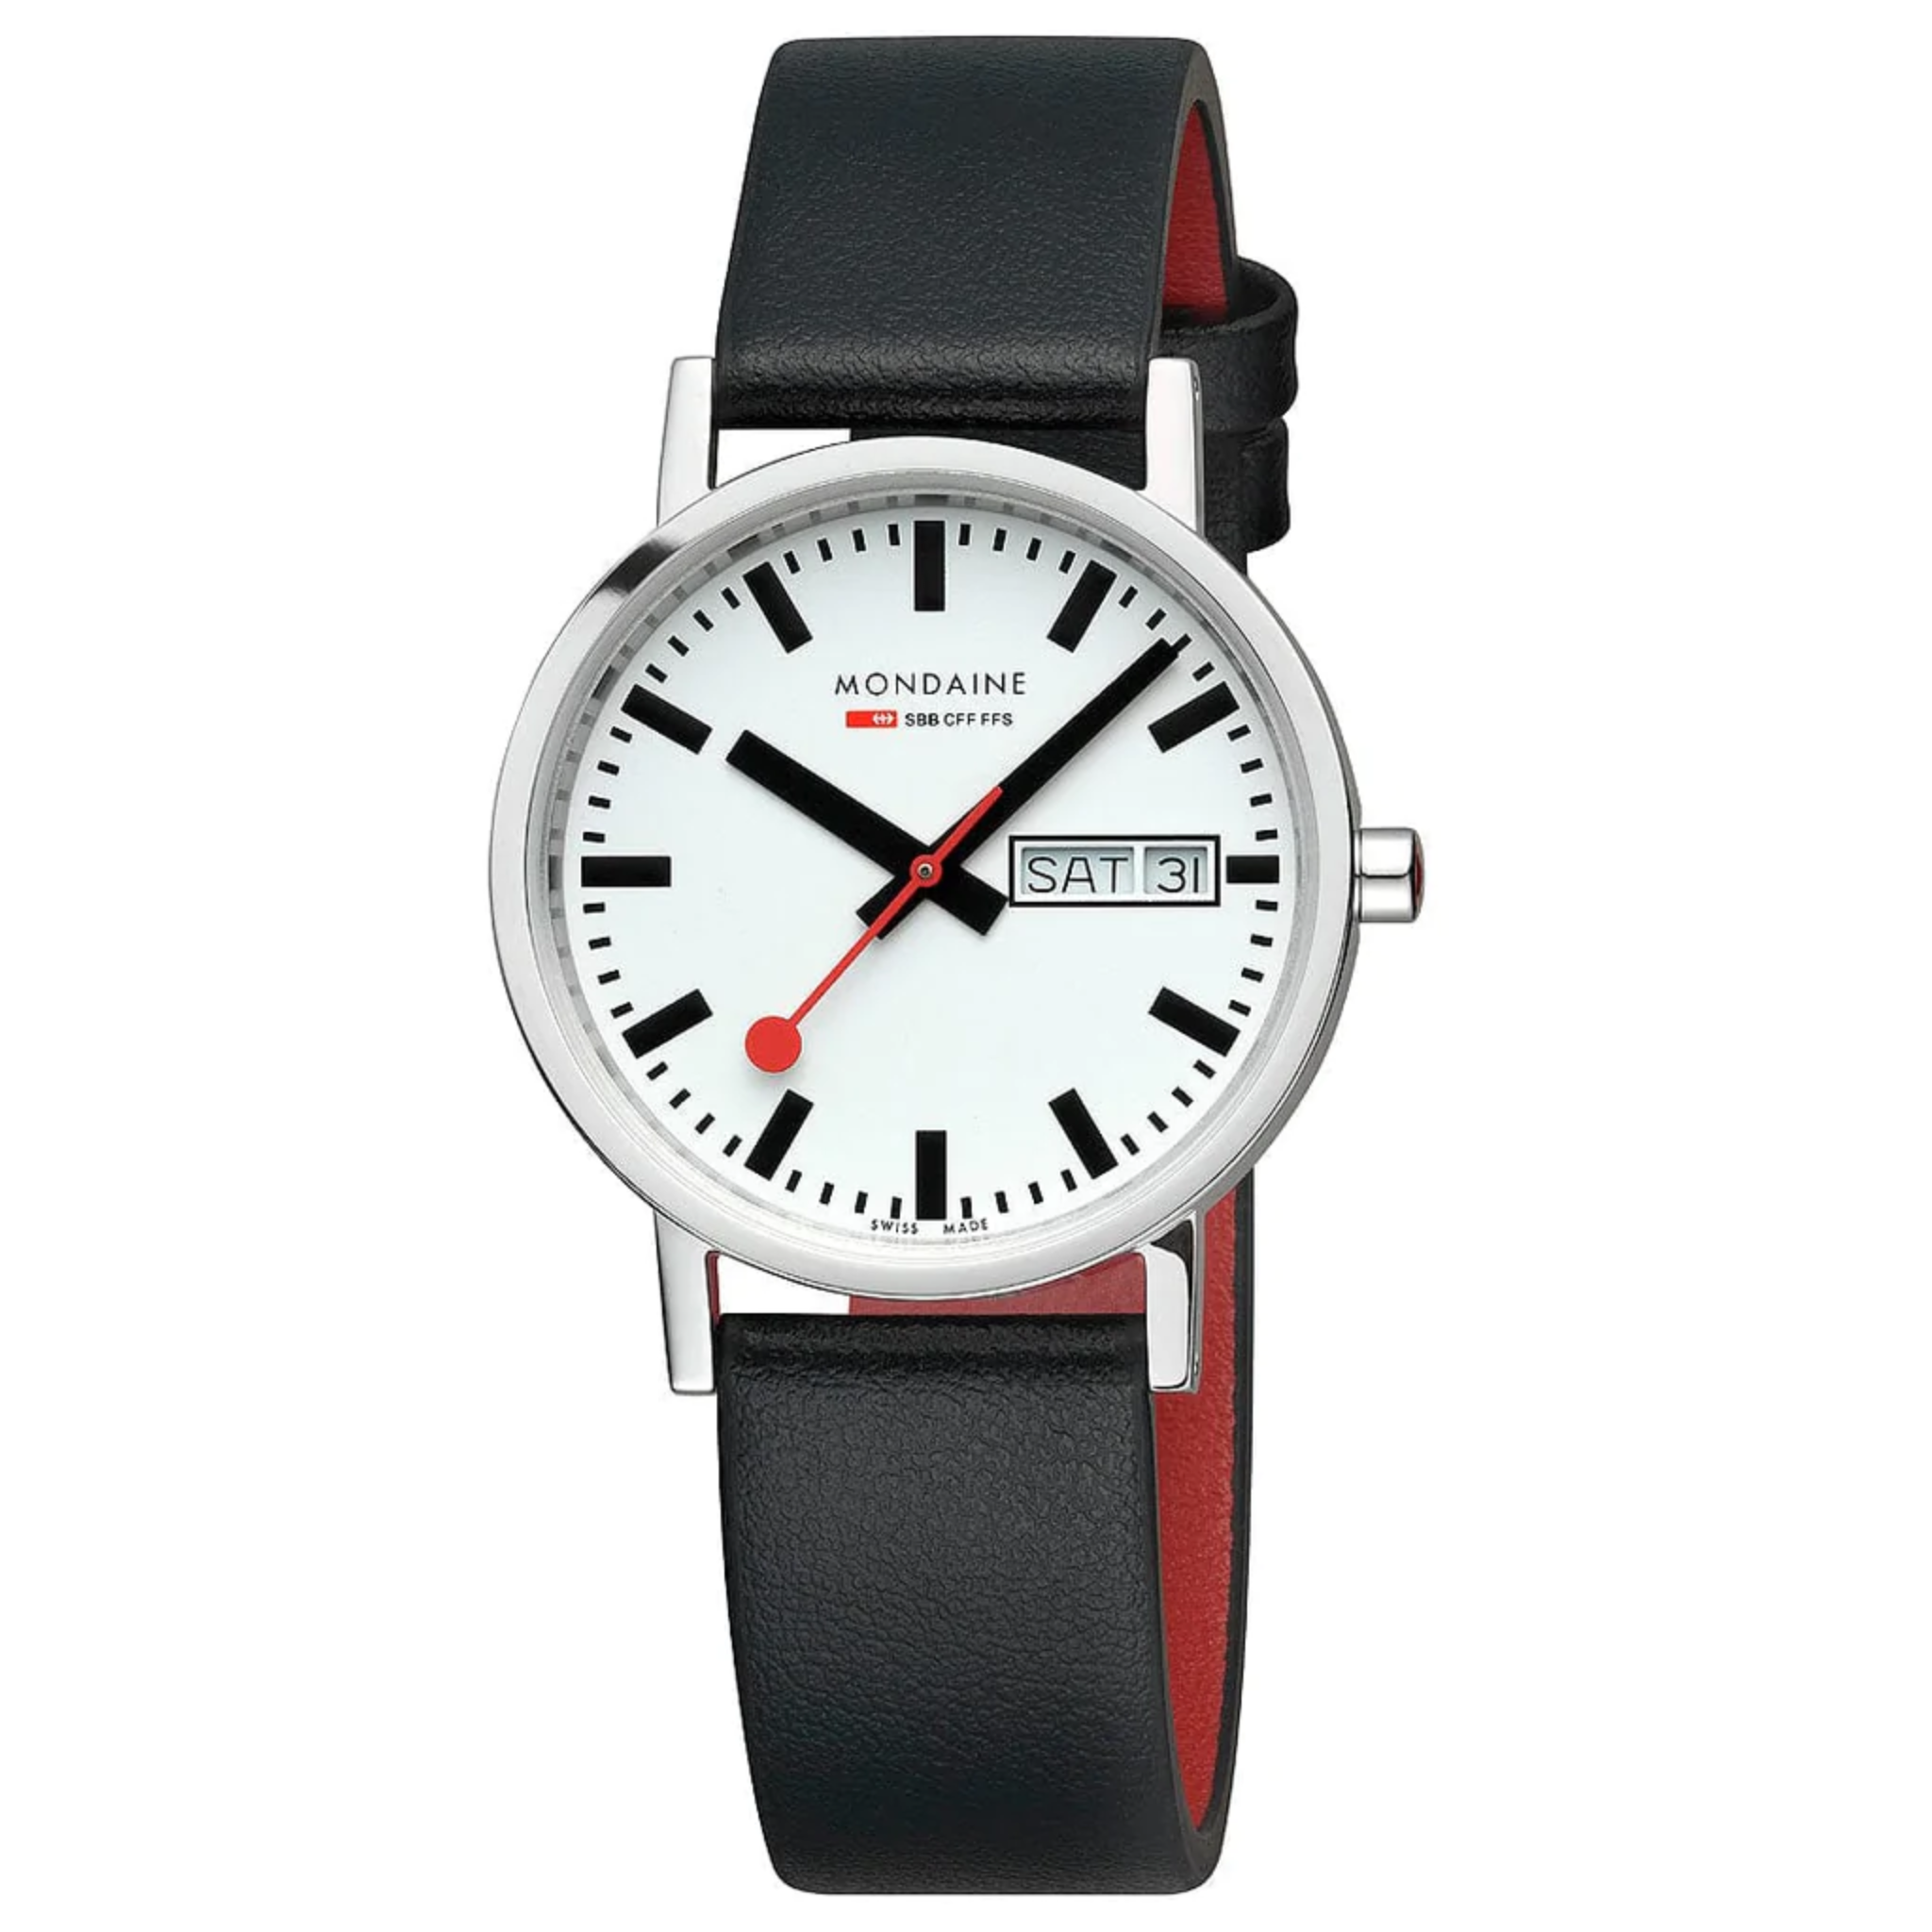 MONDAINE OFFICIAL SWISS RAILWAYS CLASSIC DAY/DATE WATCH - BLACK LEATHER 36mm